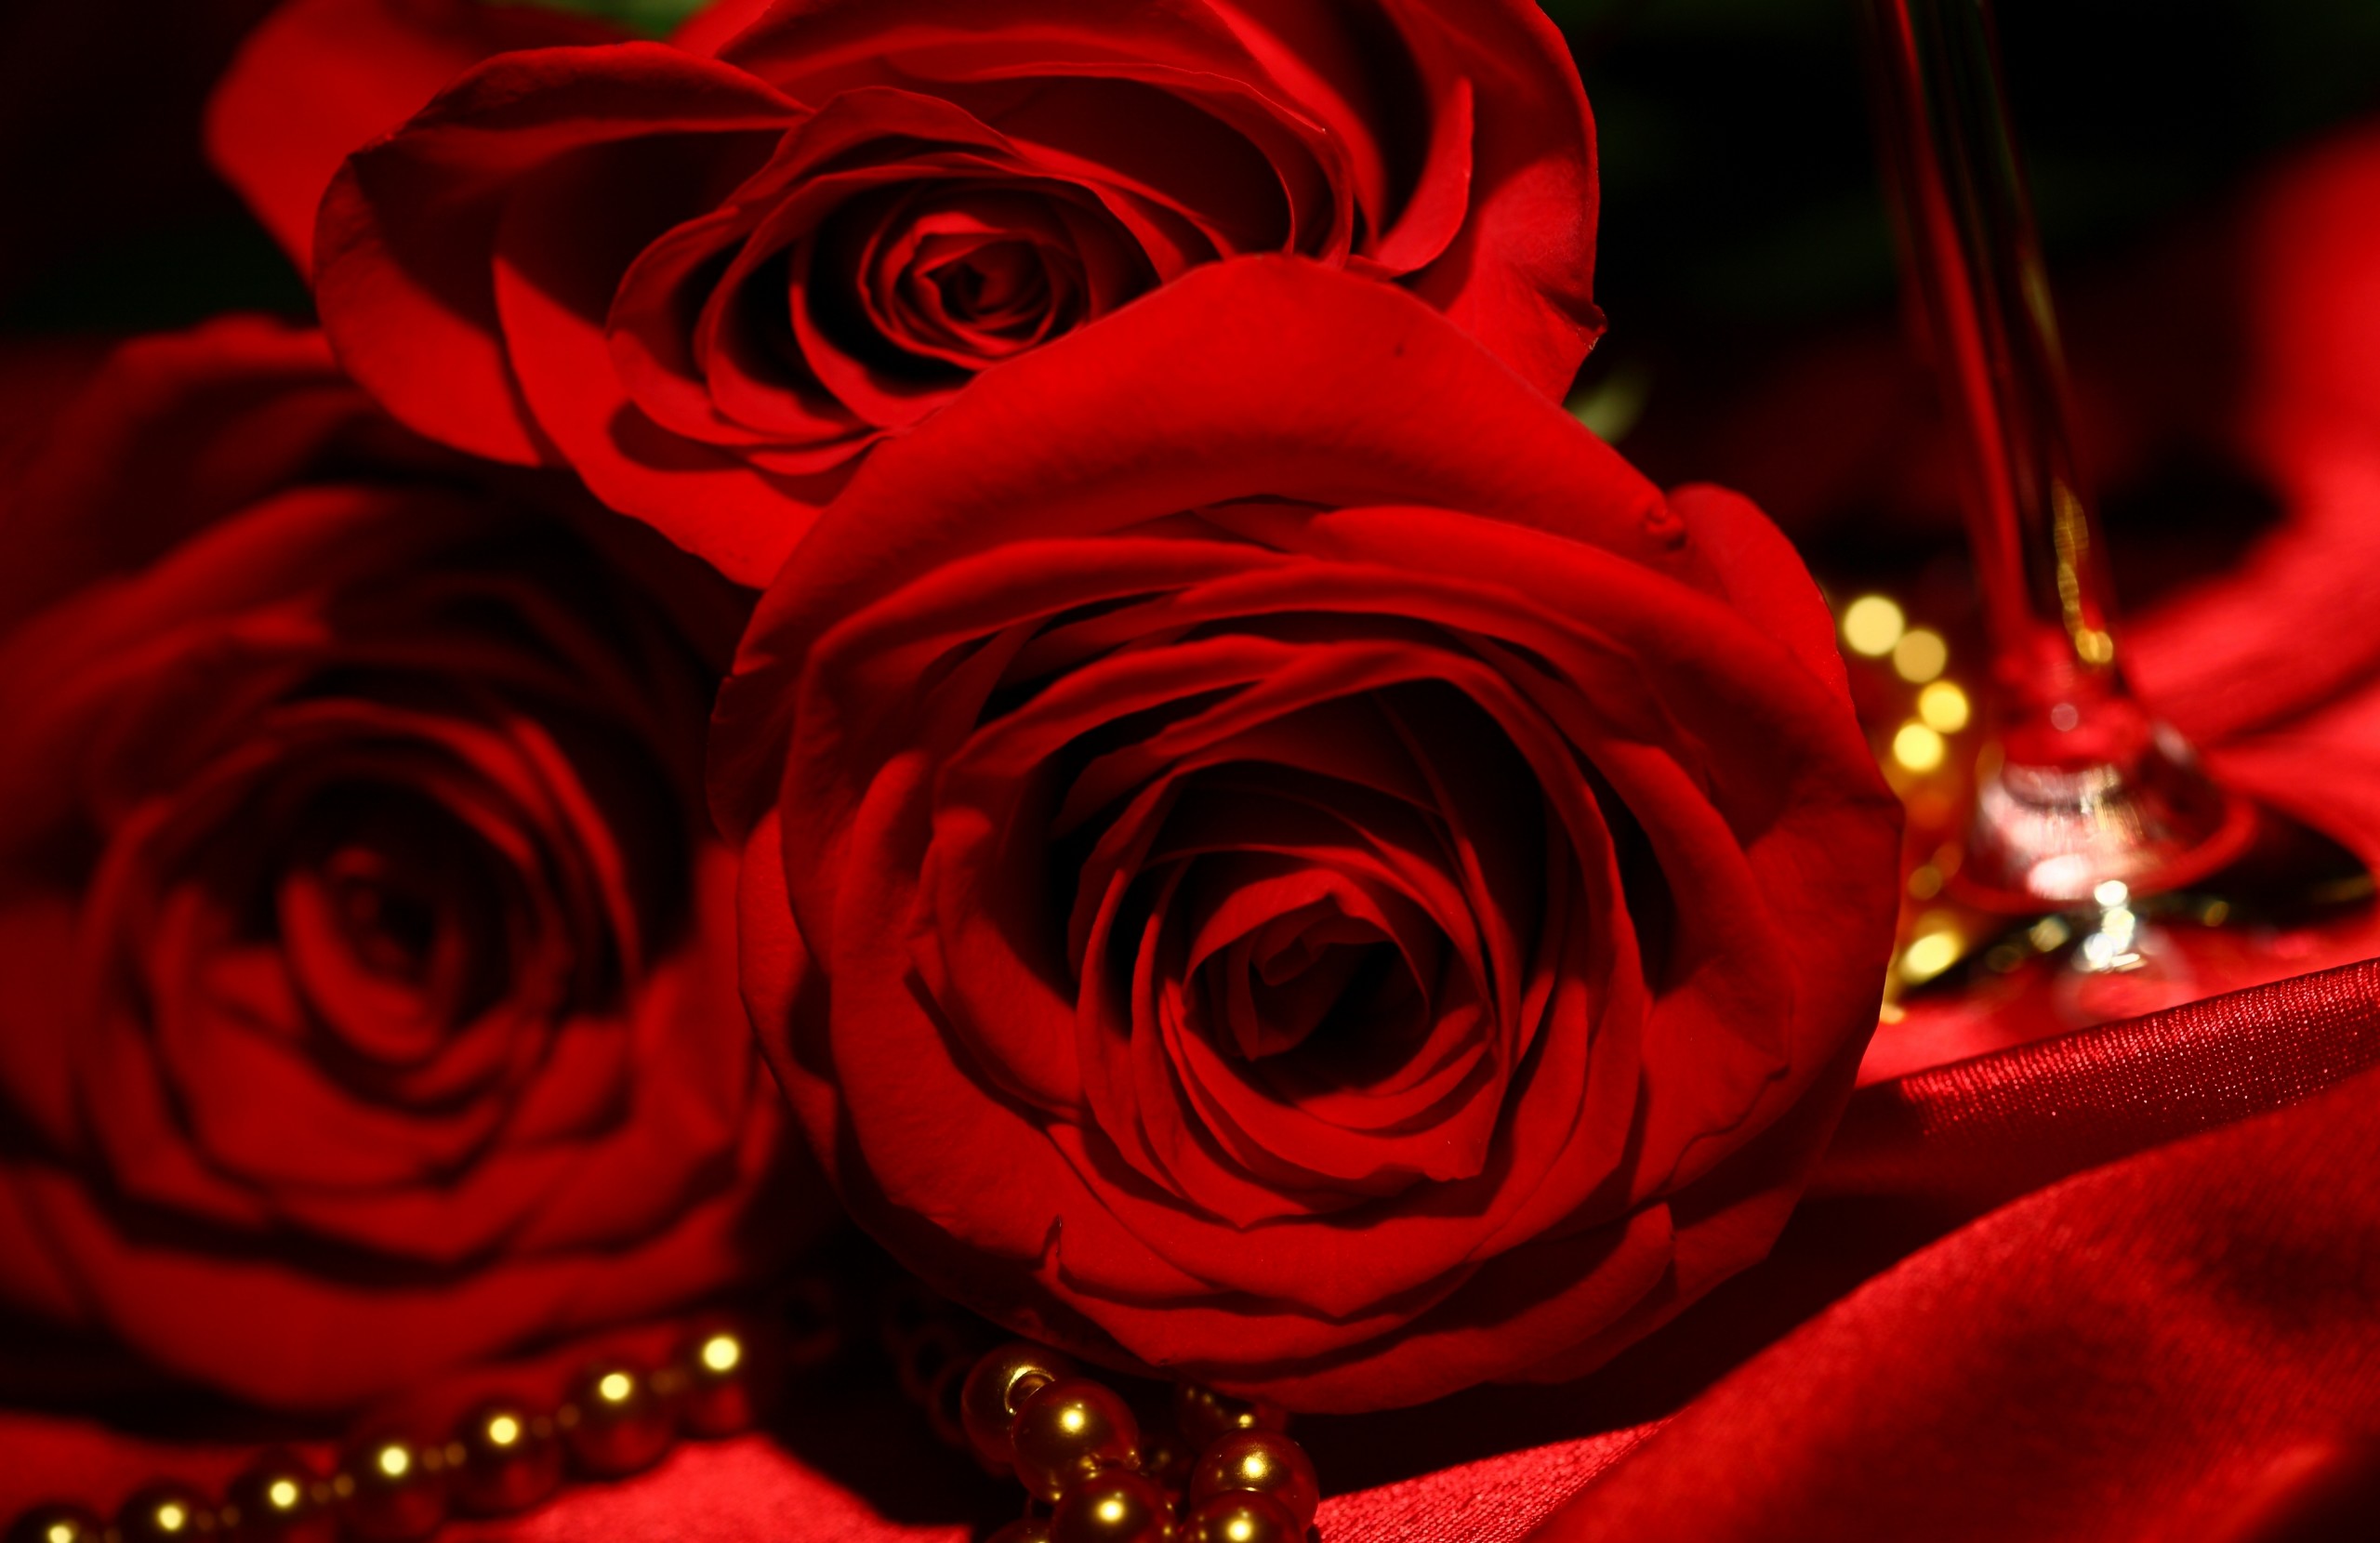 Red roses wallpapers free hd most beautiful